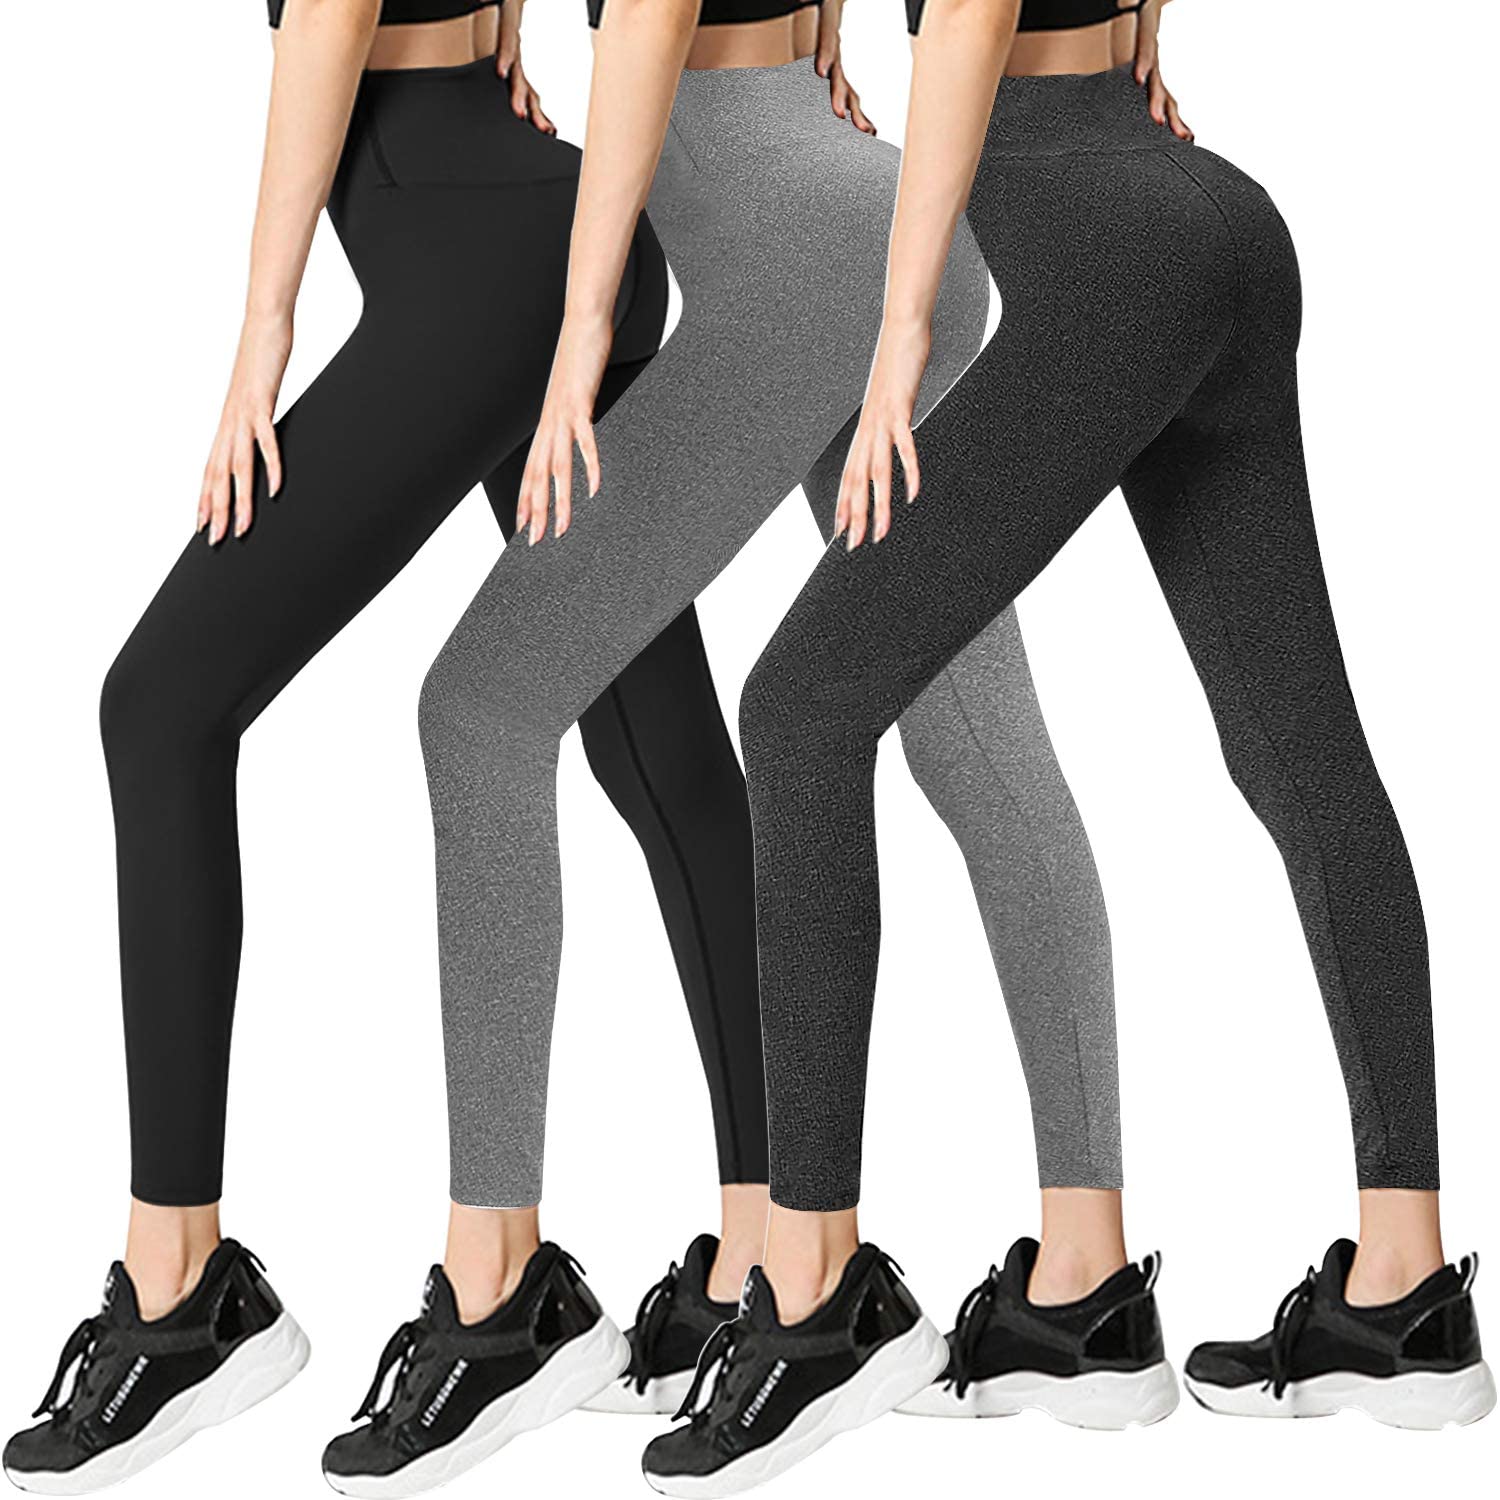 New High Waisted Leggings for Women Gym Not See Through Tummy